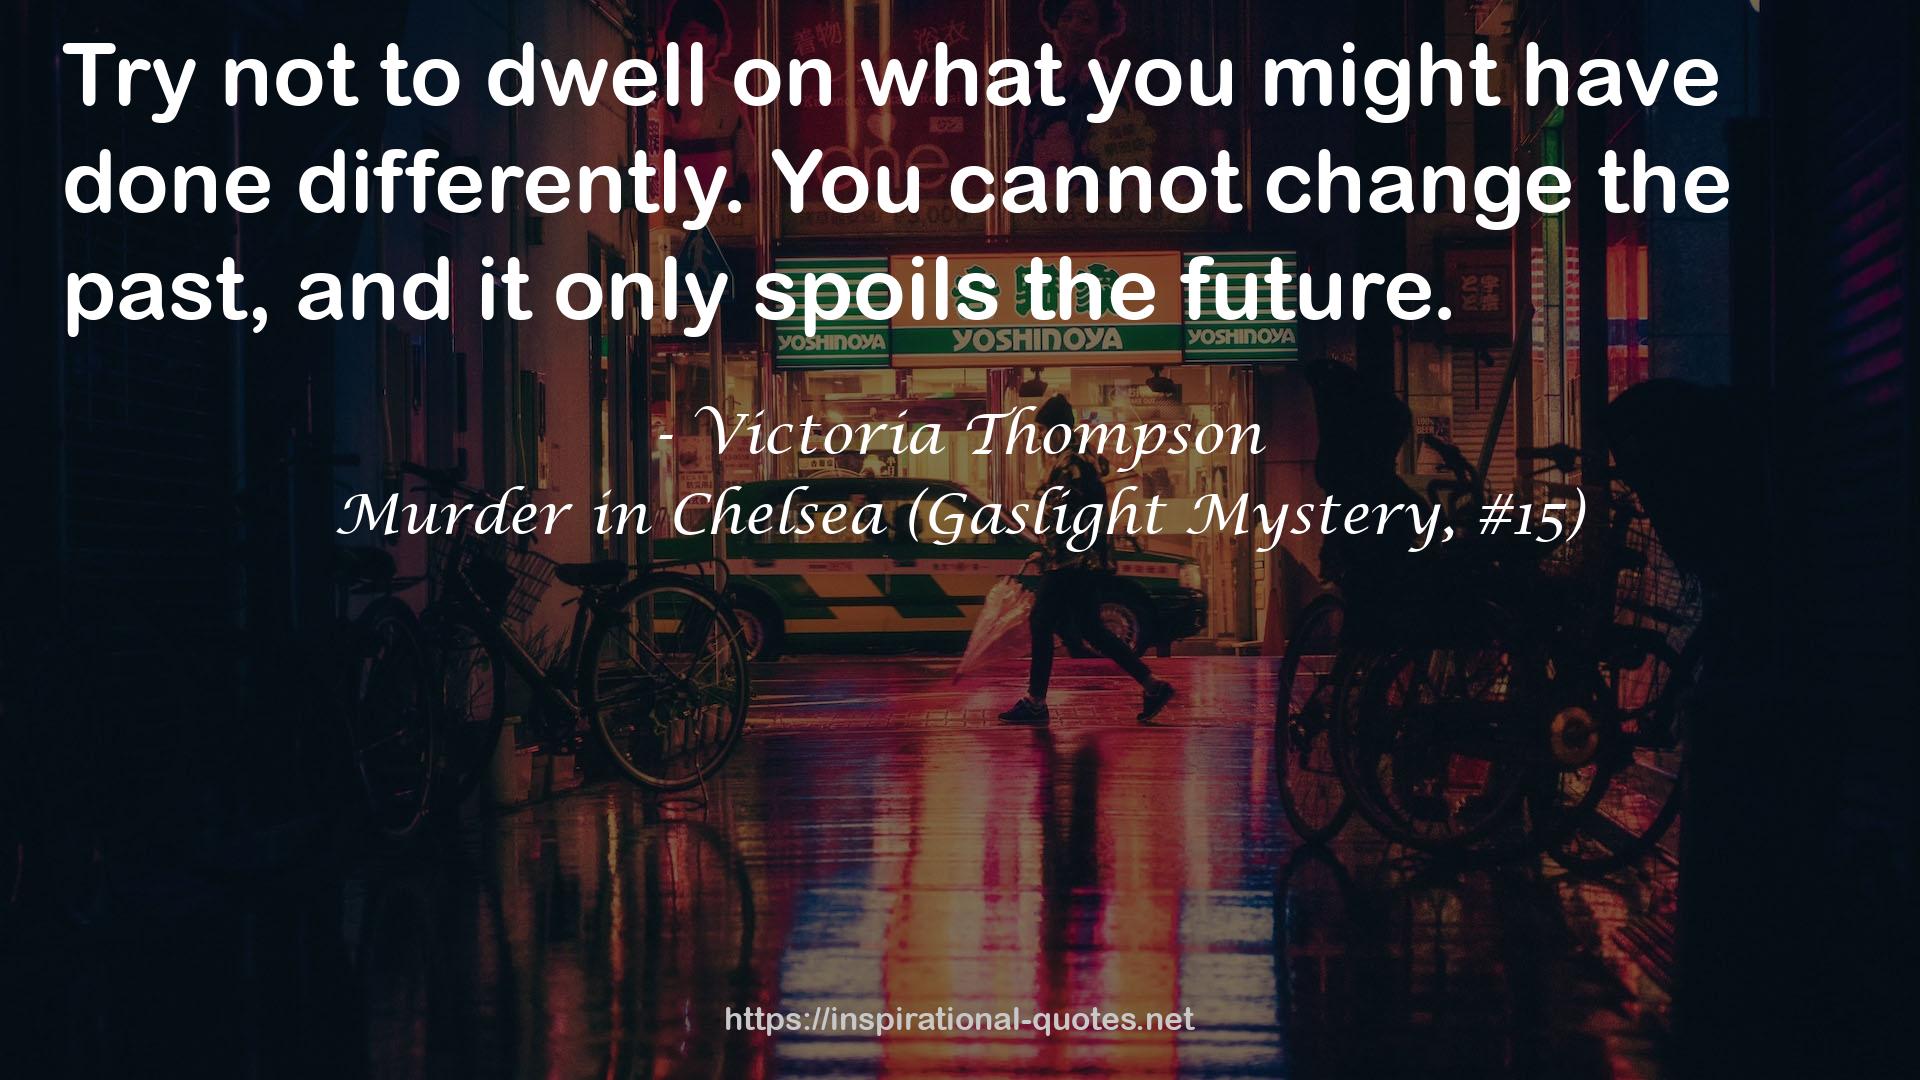 Murder in Chelsea (Gaslight Mystery, #15) QUOTES